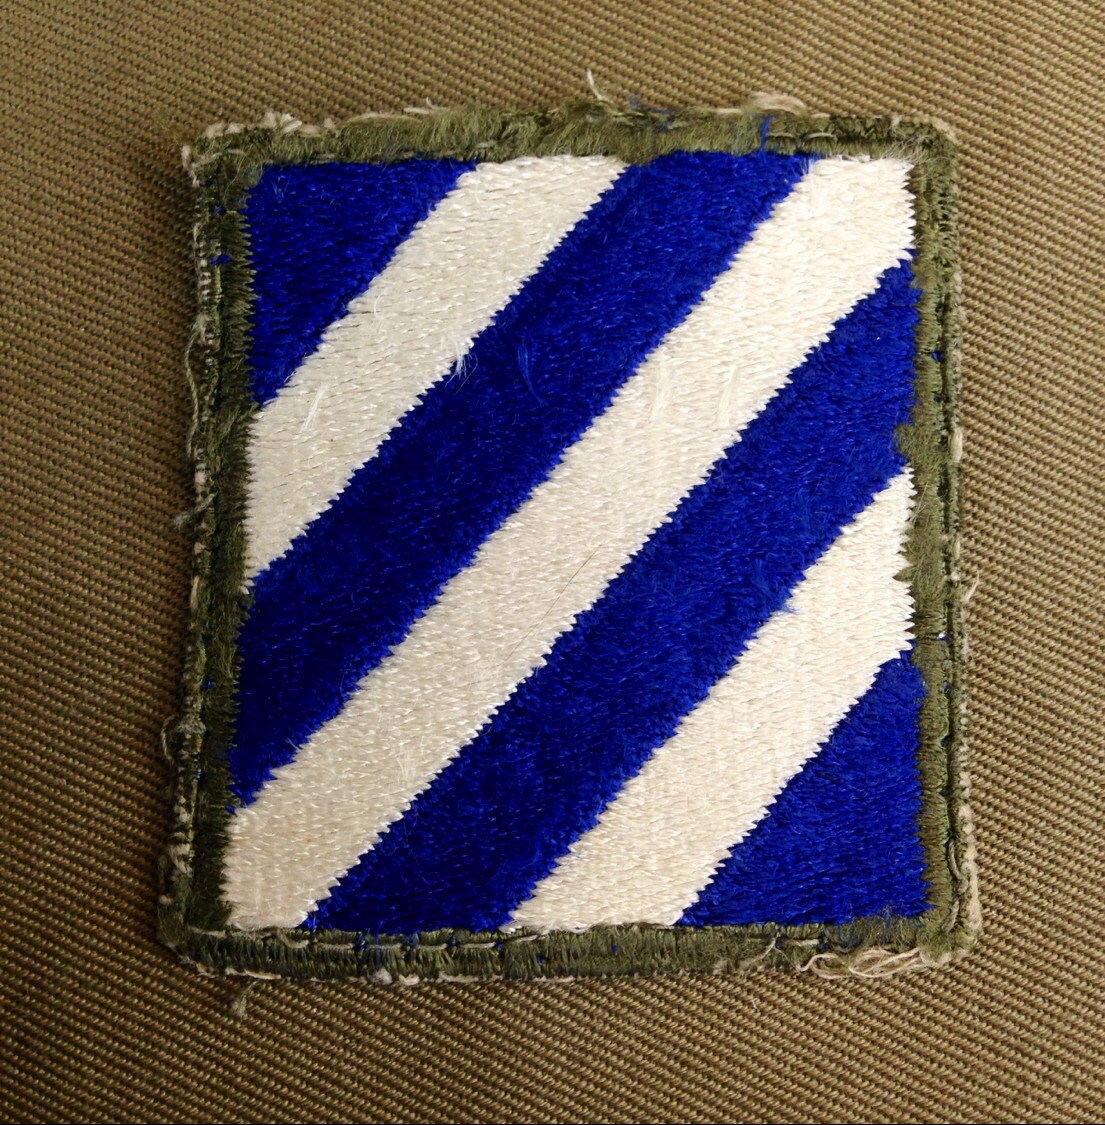 WW2 US Army 3rd Infantry Division Shoulder Patch Excellent